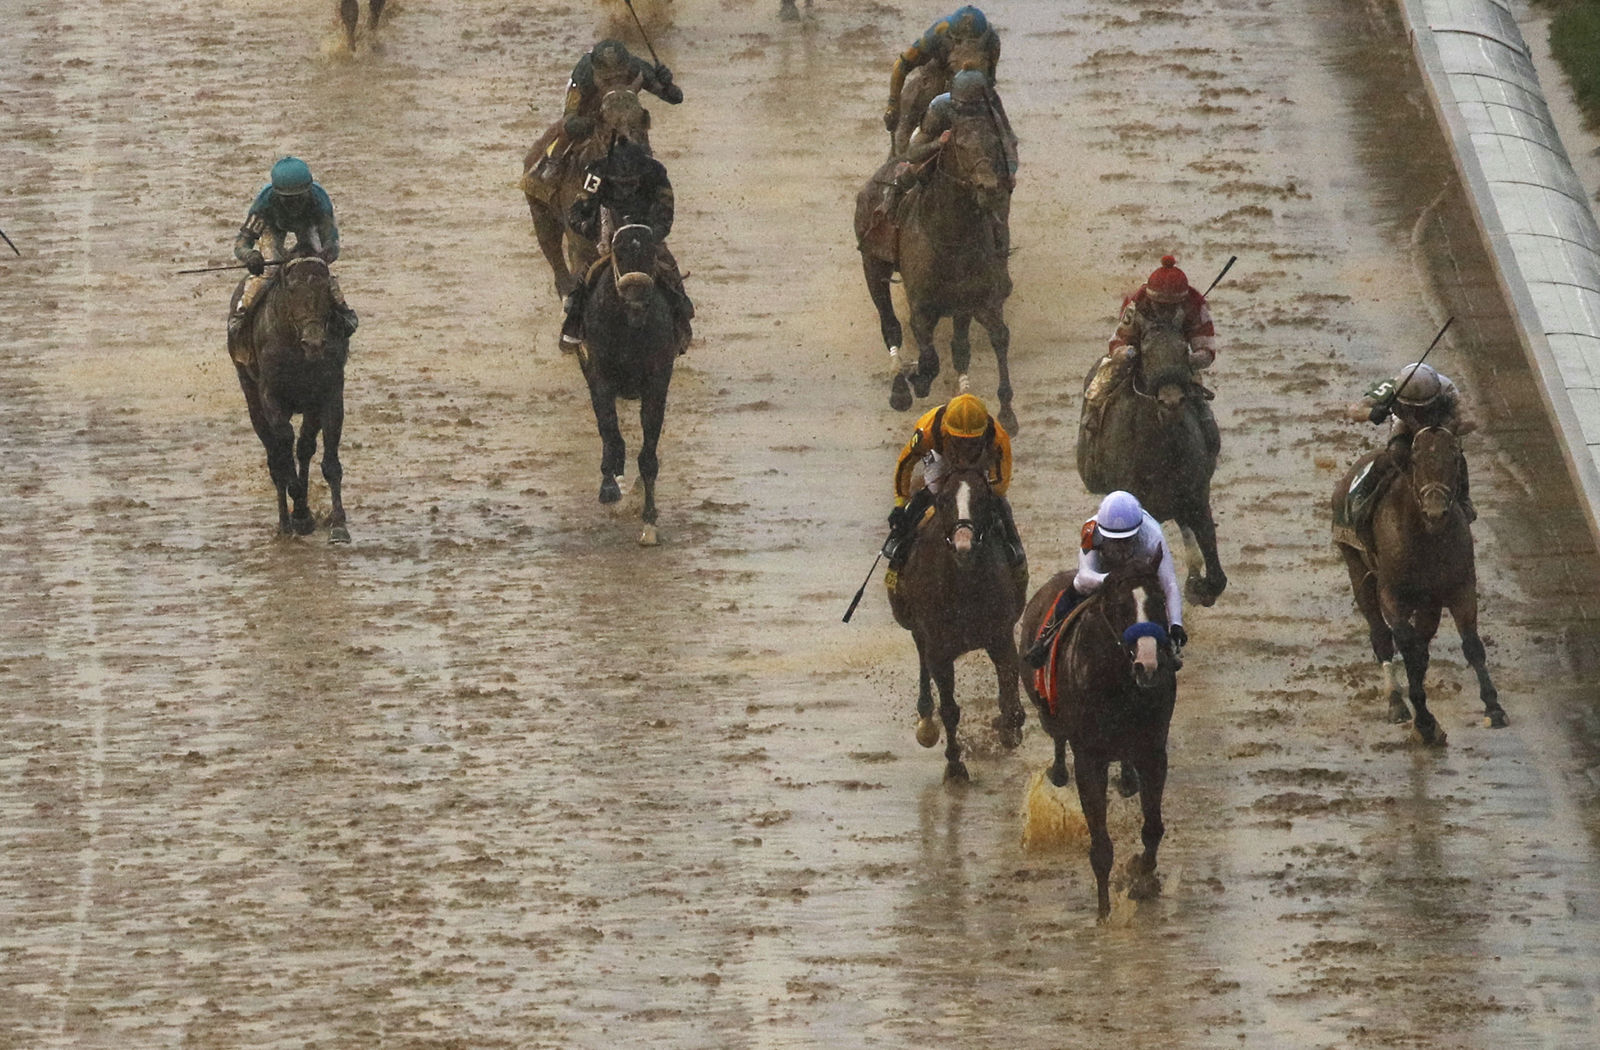 Mike Smith rides Justify to victory during the 144th running of the Kentucky Derby horse race at Churchill Downs Saturday, May 5, 2018, in Louisville, Ky. (AP Photo/Charlie Riedel)